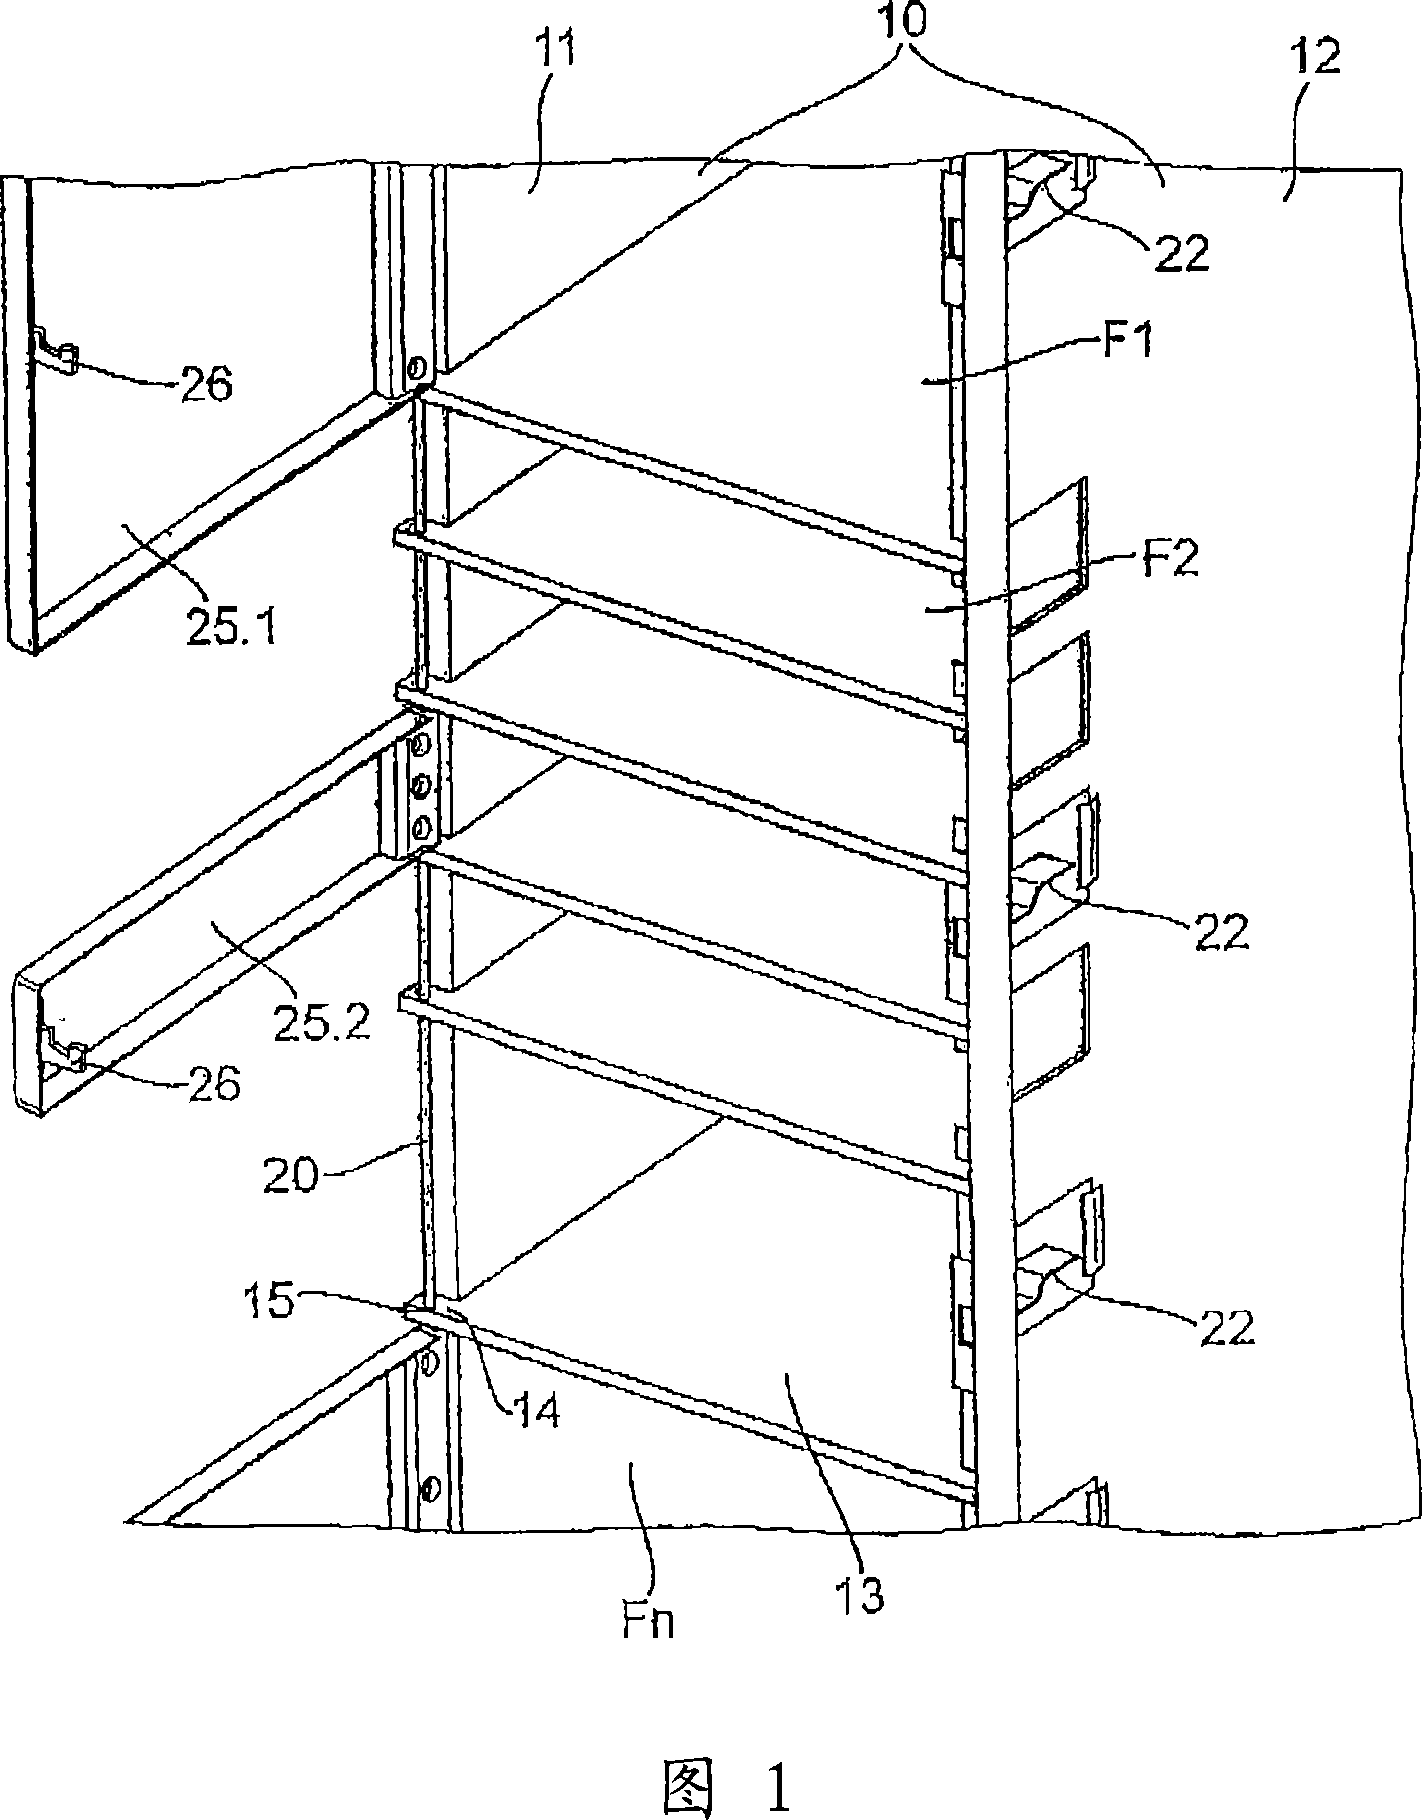 Cabinet with multi-compartment cabinet body